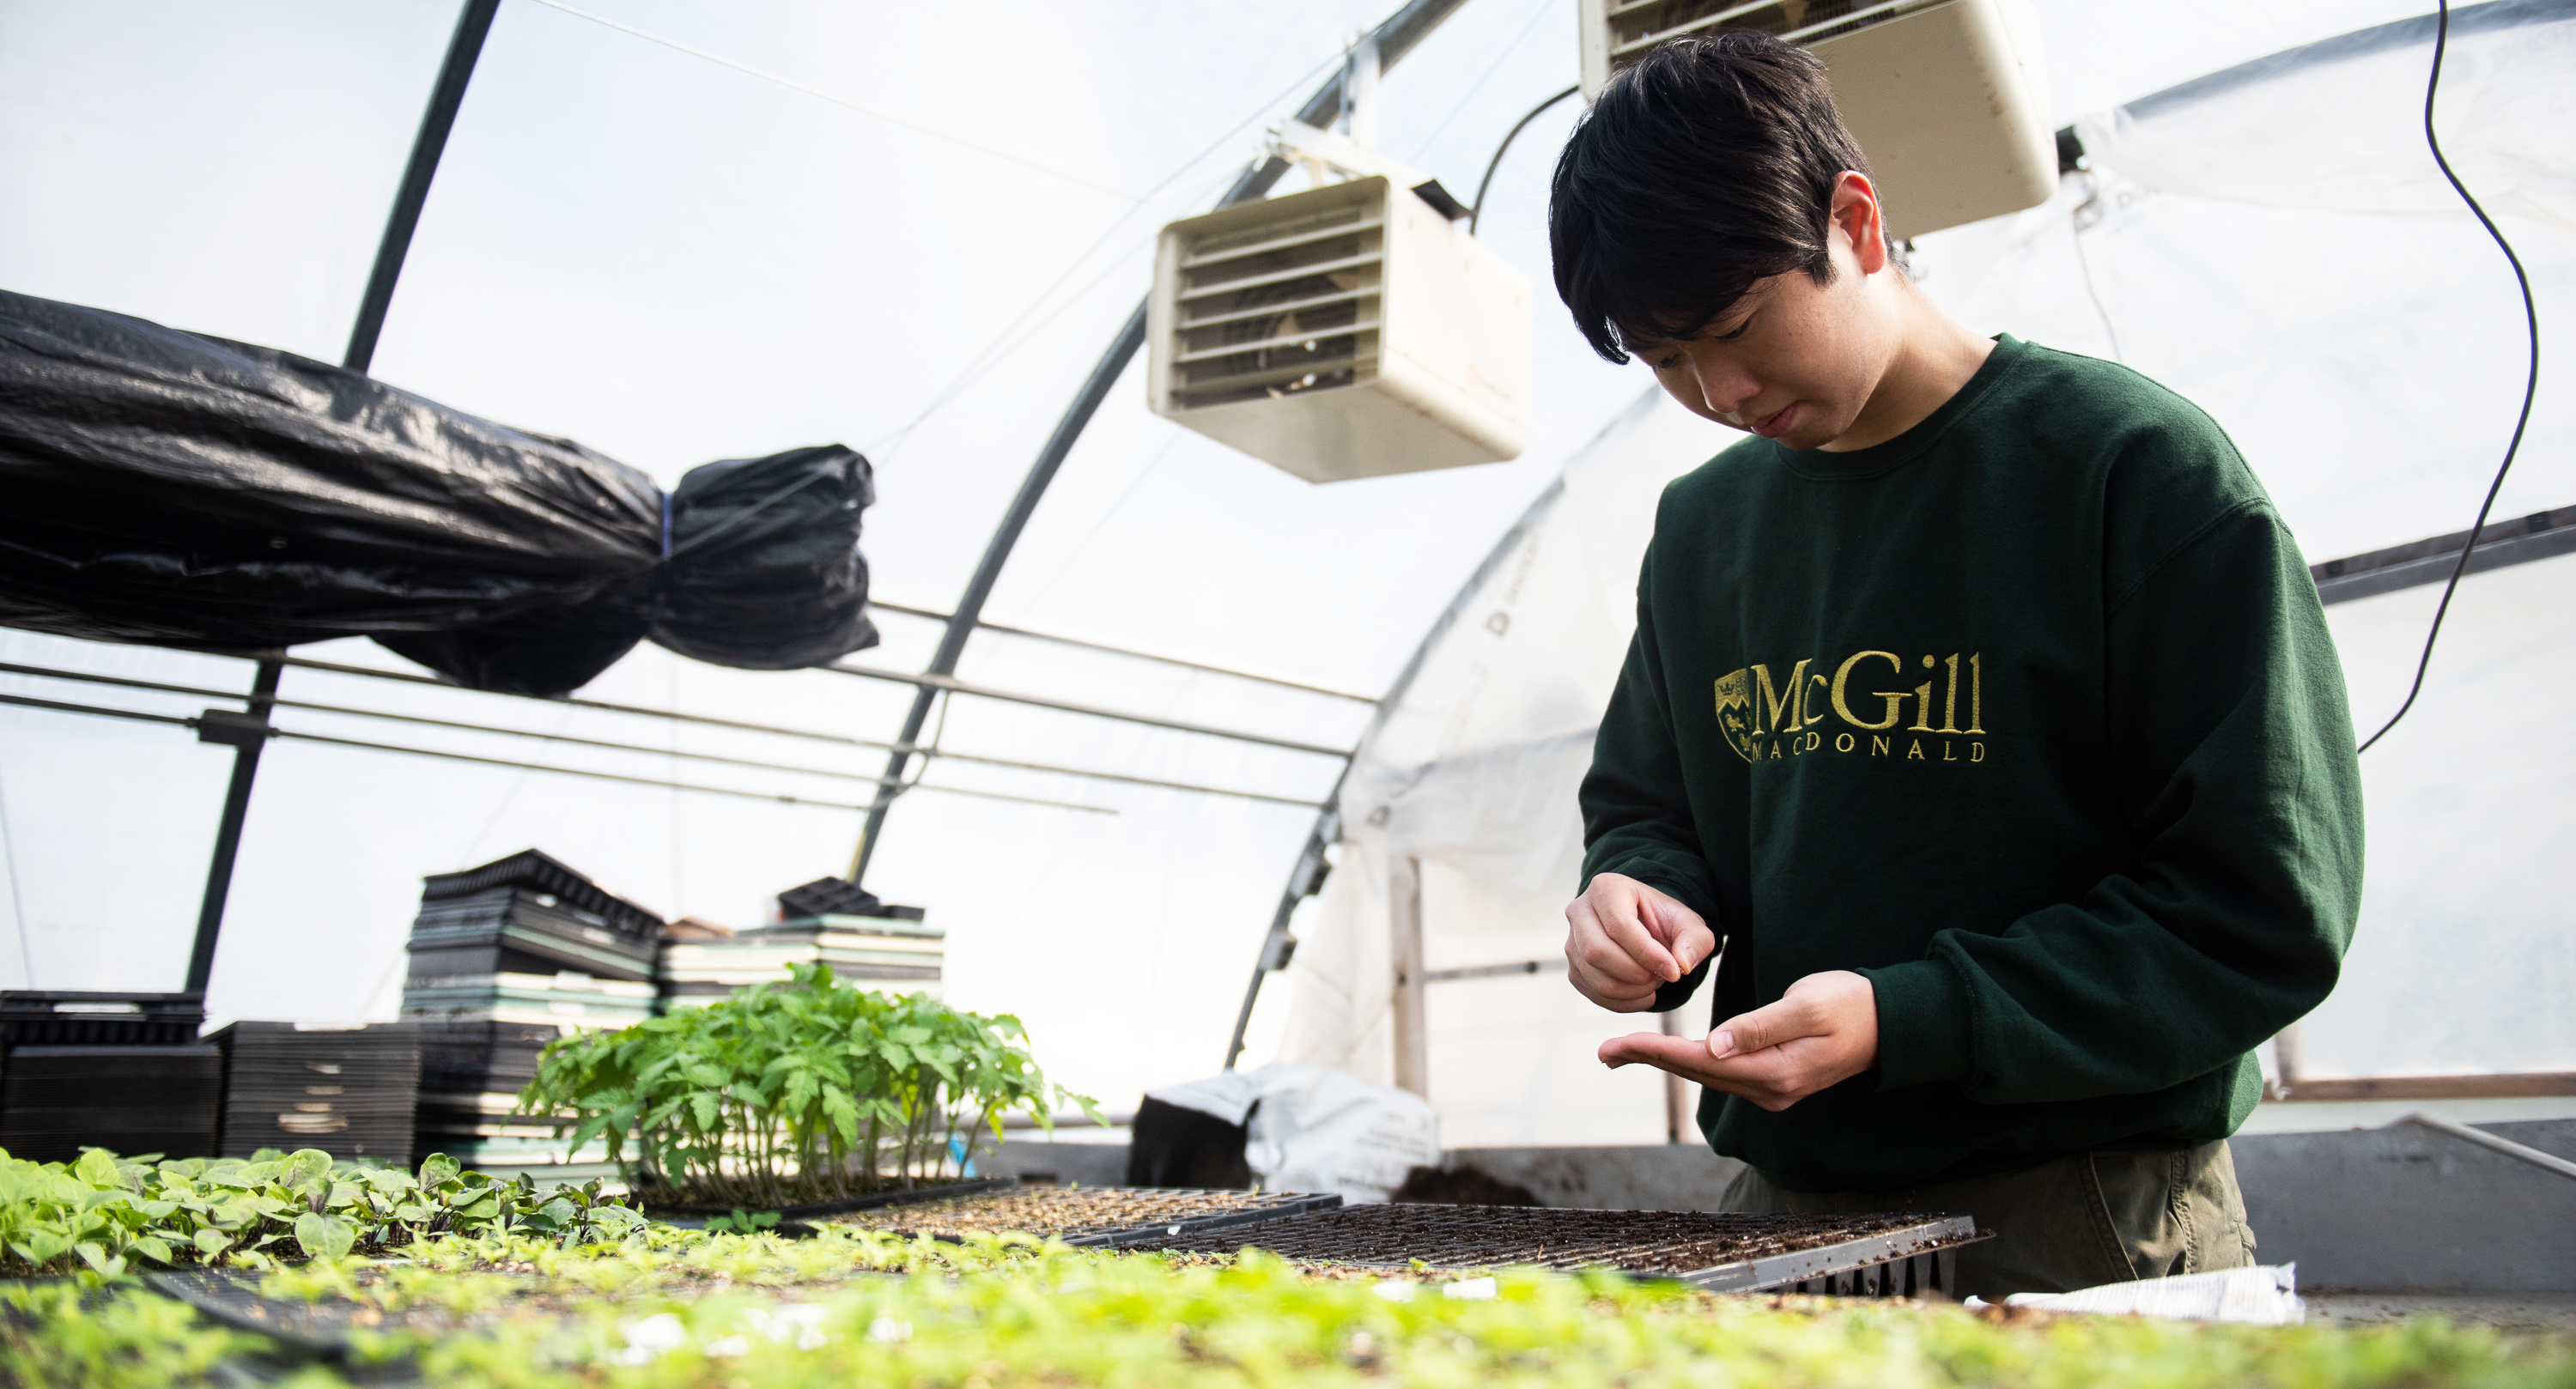 Student planting seeds in a greenhouse, wearing a green Macdonald Campus sweatshirt